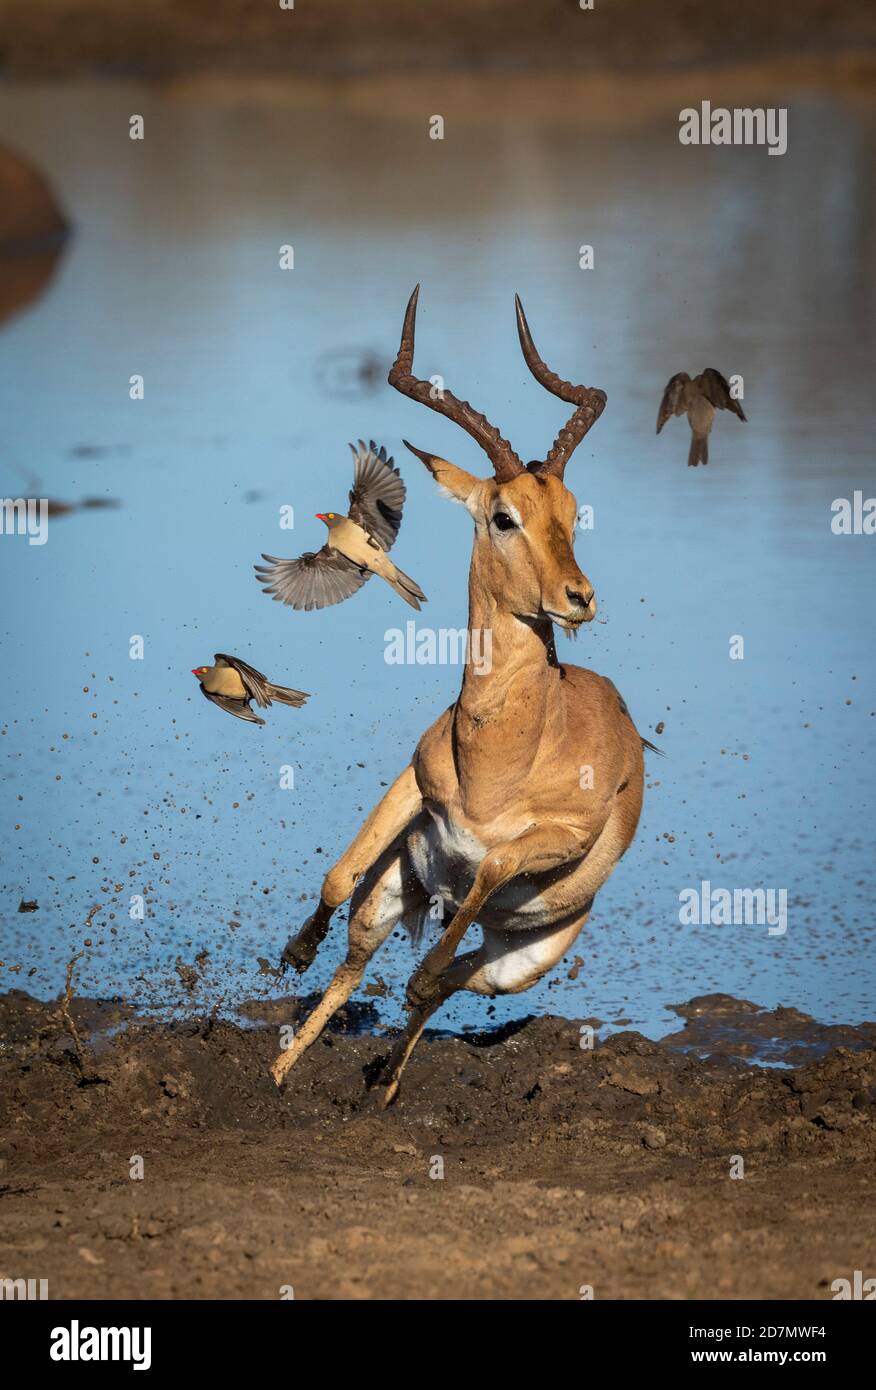 Vertical portrait of a male impala running out of muddy edge of water with ox peckers flying off in Kruger Park in South Africa Stock Photo